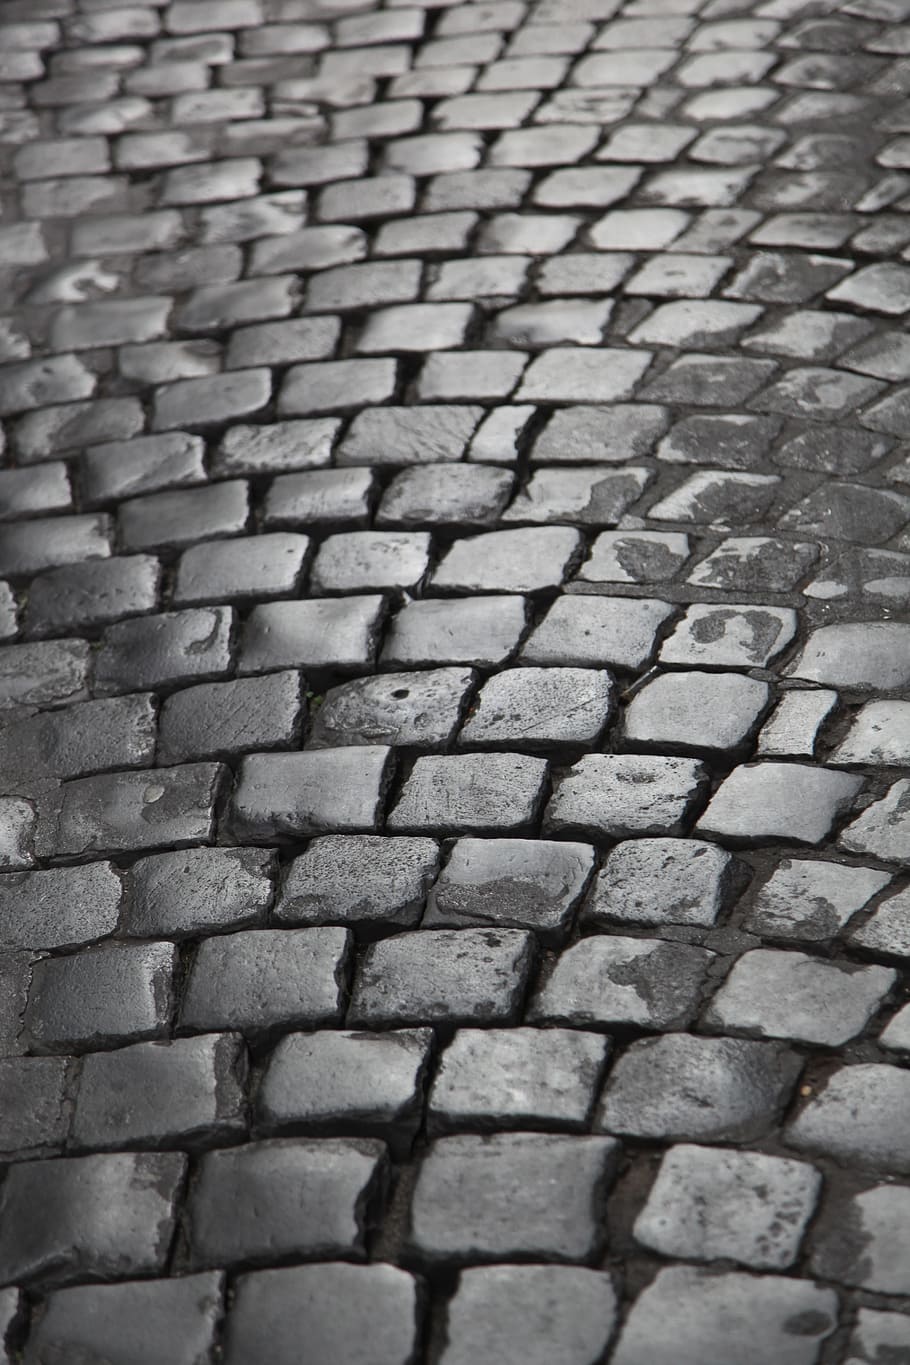 Road, Stone, Cobbles, Texture, stone material, backgrounds, textured, full frame, pattern, street